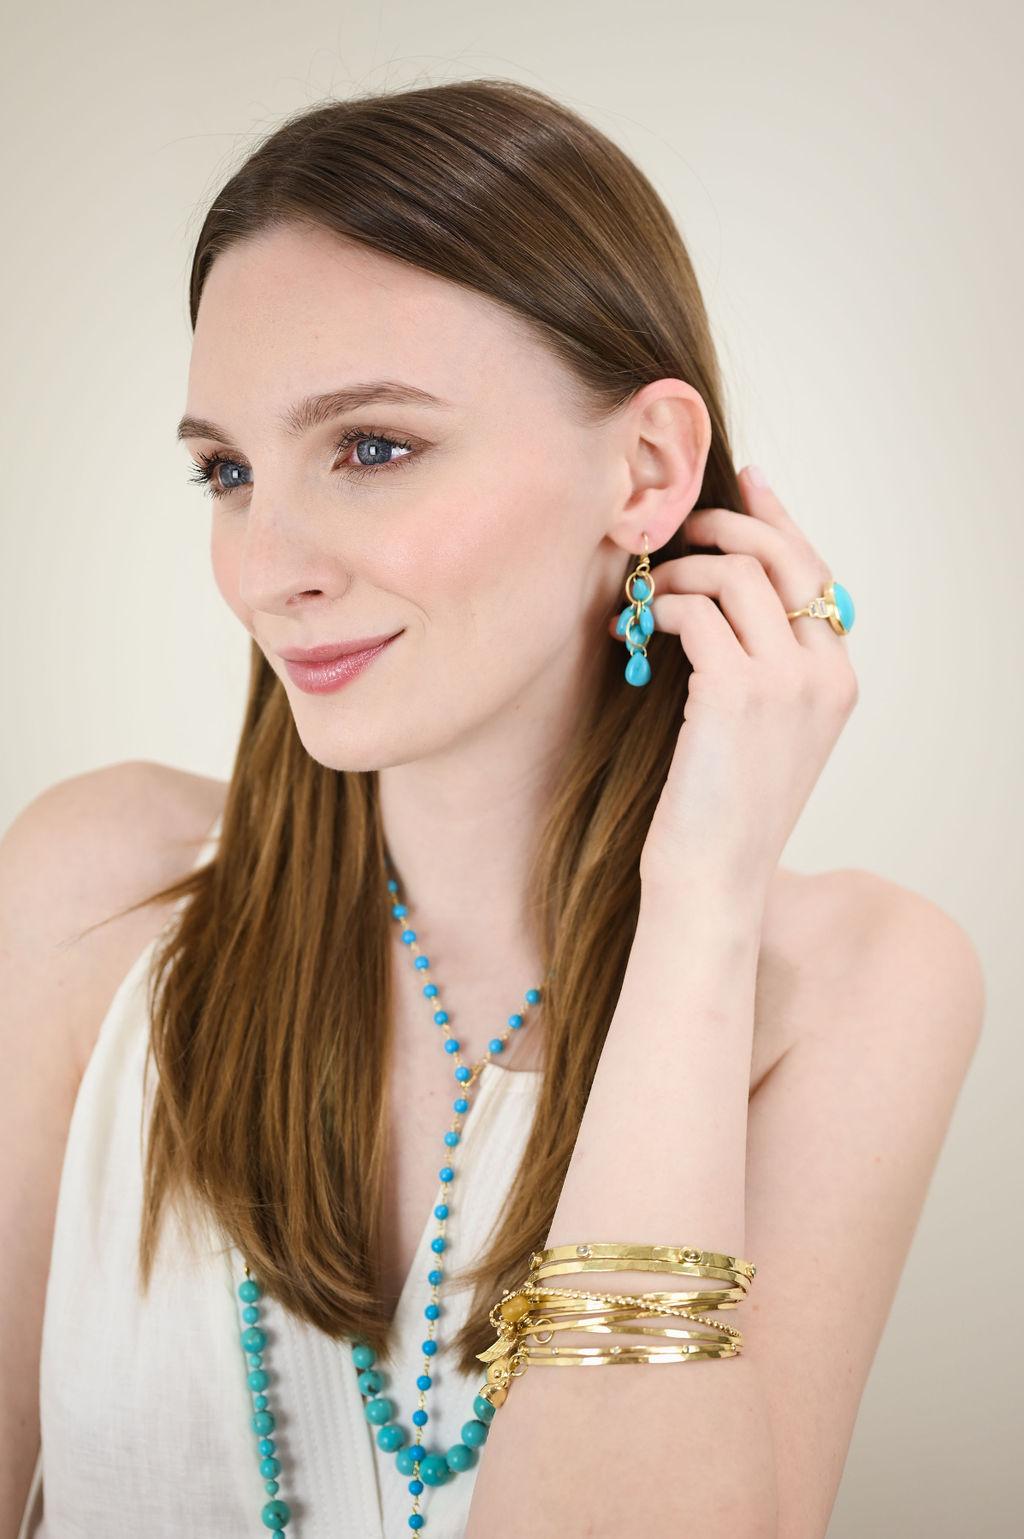 Handwrapped in 18 karat gold*, Faye Kim's Turquoise Lariat Necklace can be adjusted to be worn at various lengths, making it the perfect complement to any outfit. The stones' striking hue pops beautifully against black, white, or virtually any other